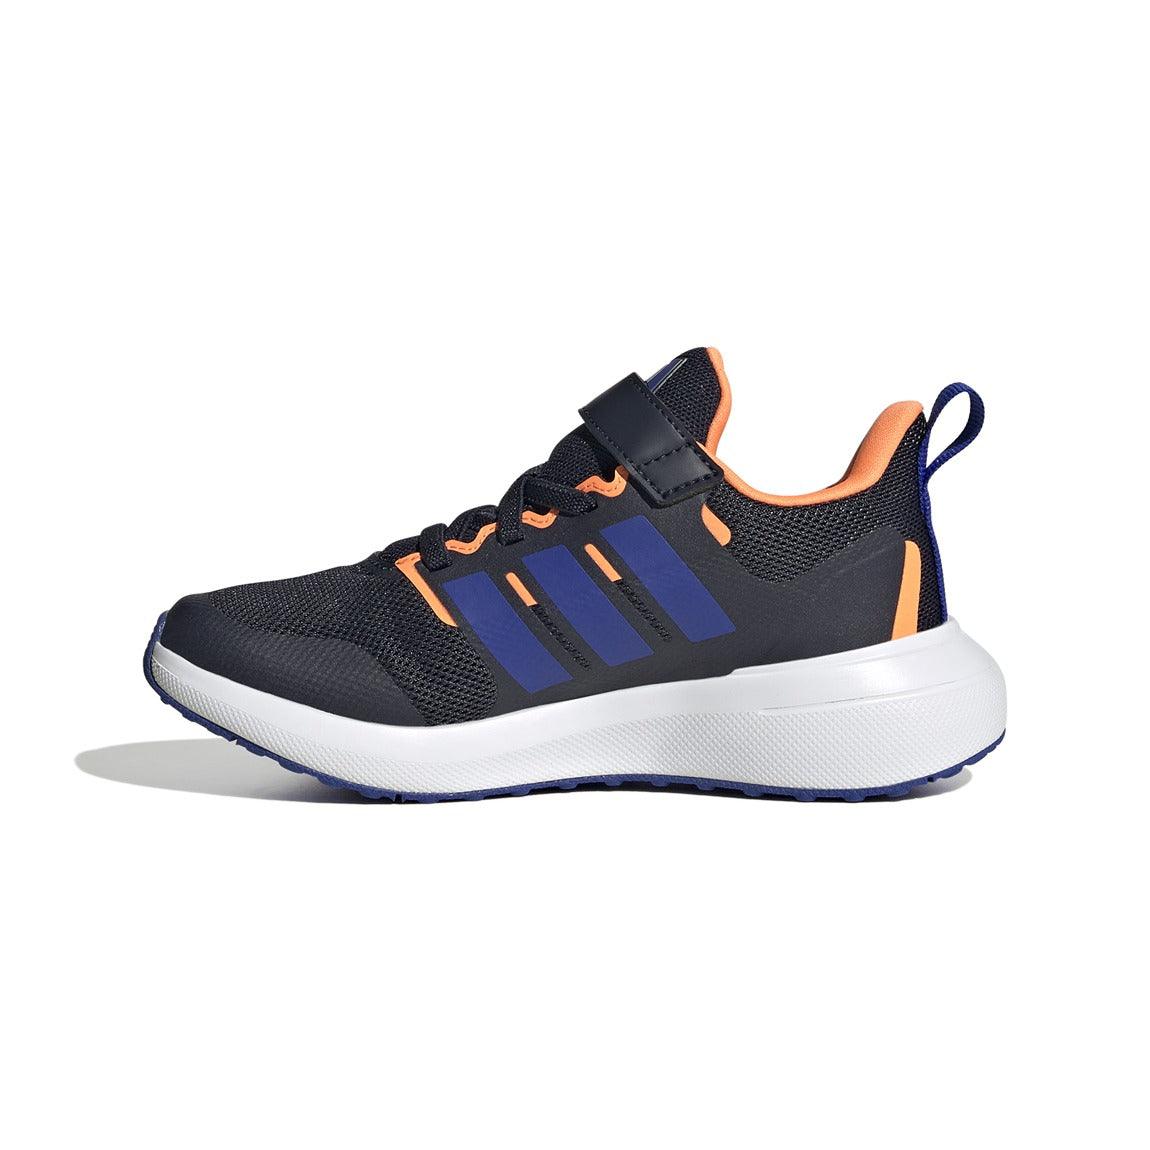 FortaRun 2.0 Cloudfoam Elastic Lace Top Strap Running Shoes - Youth - Sports Excellence